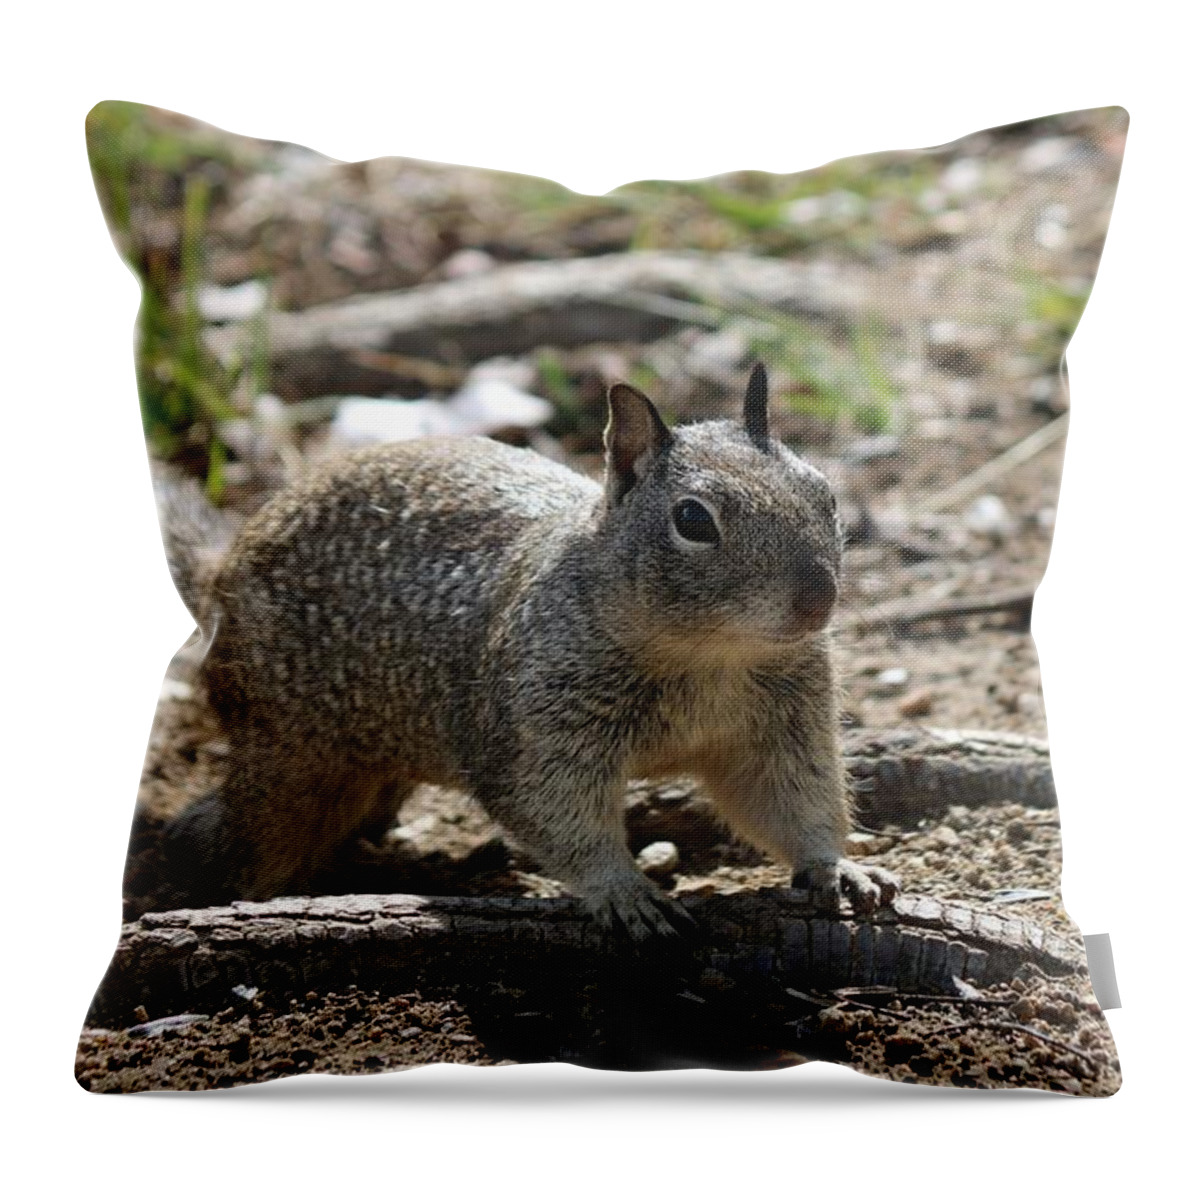 Ground Throw Pillow featuring the photograph Squirrel Play by Christy Pooschke